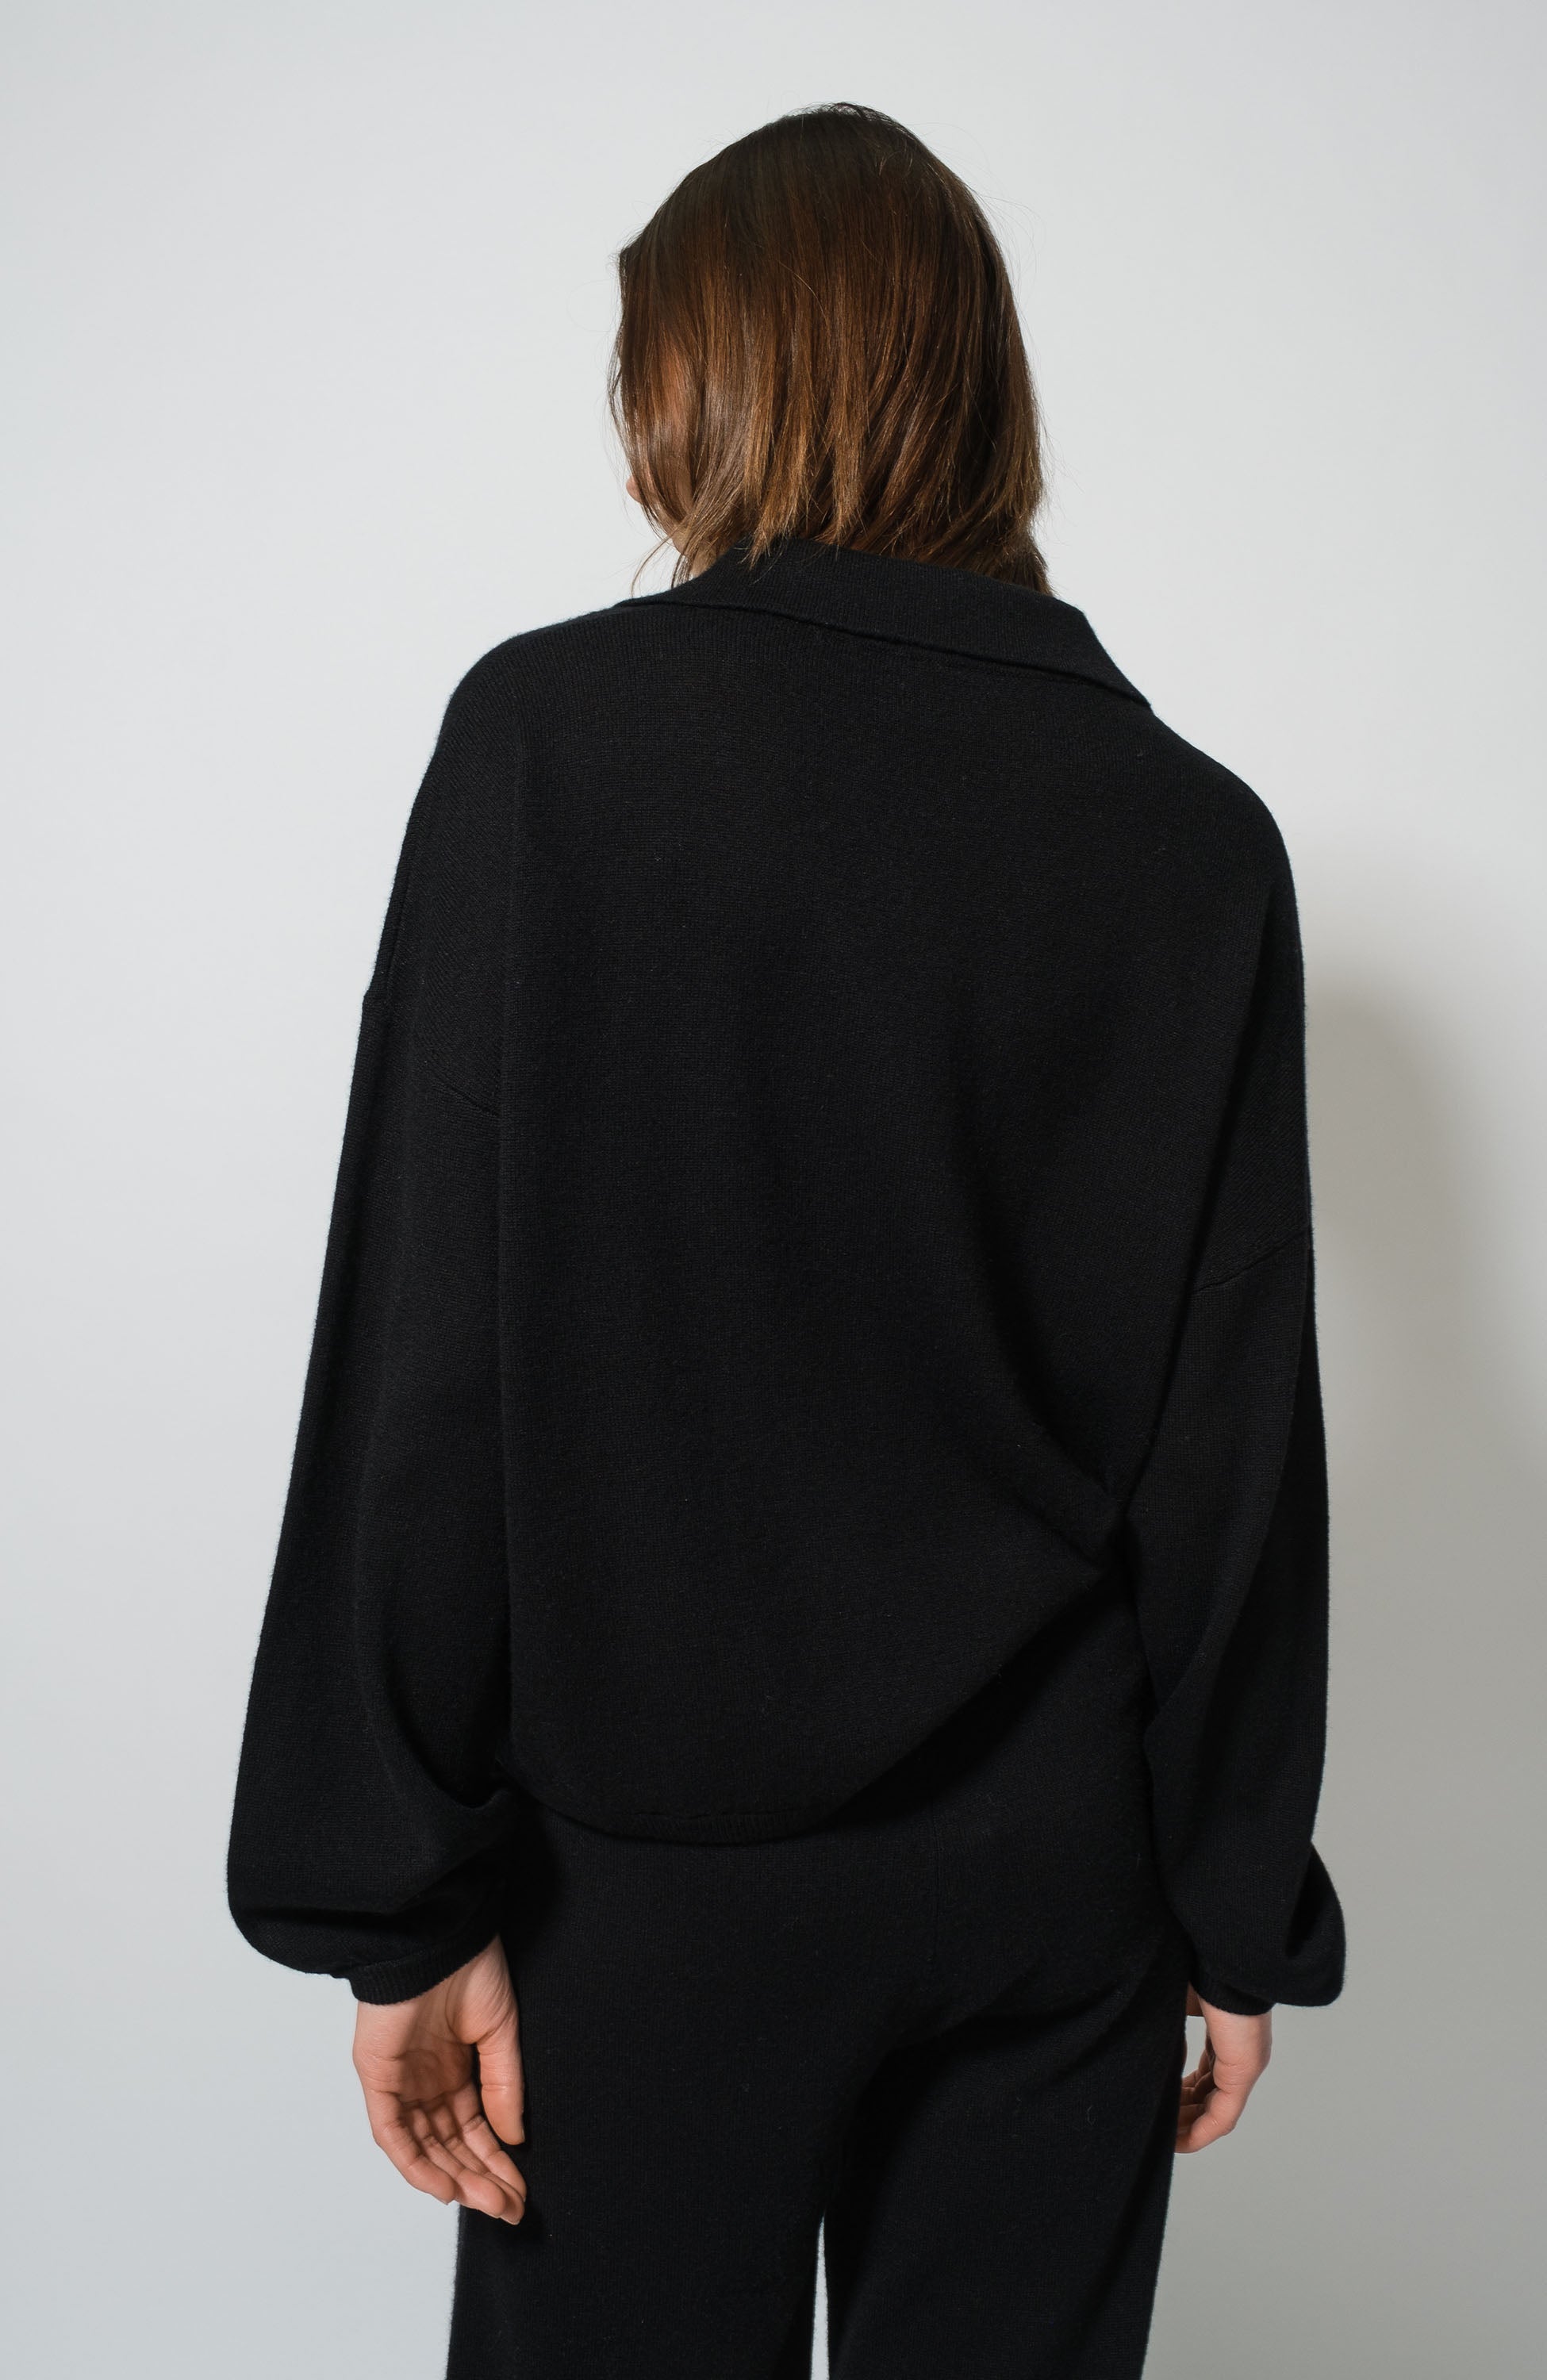 Poloneck cashmere sweater